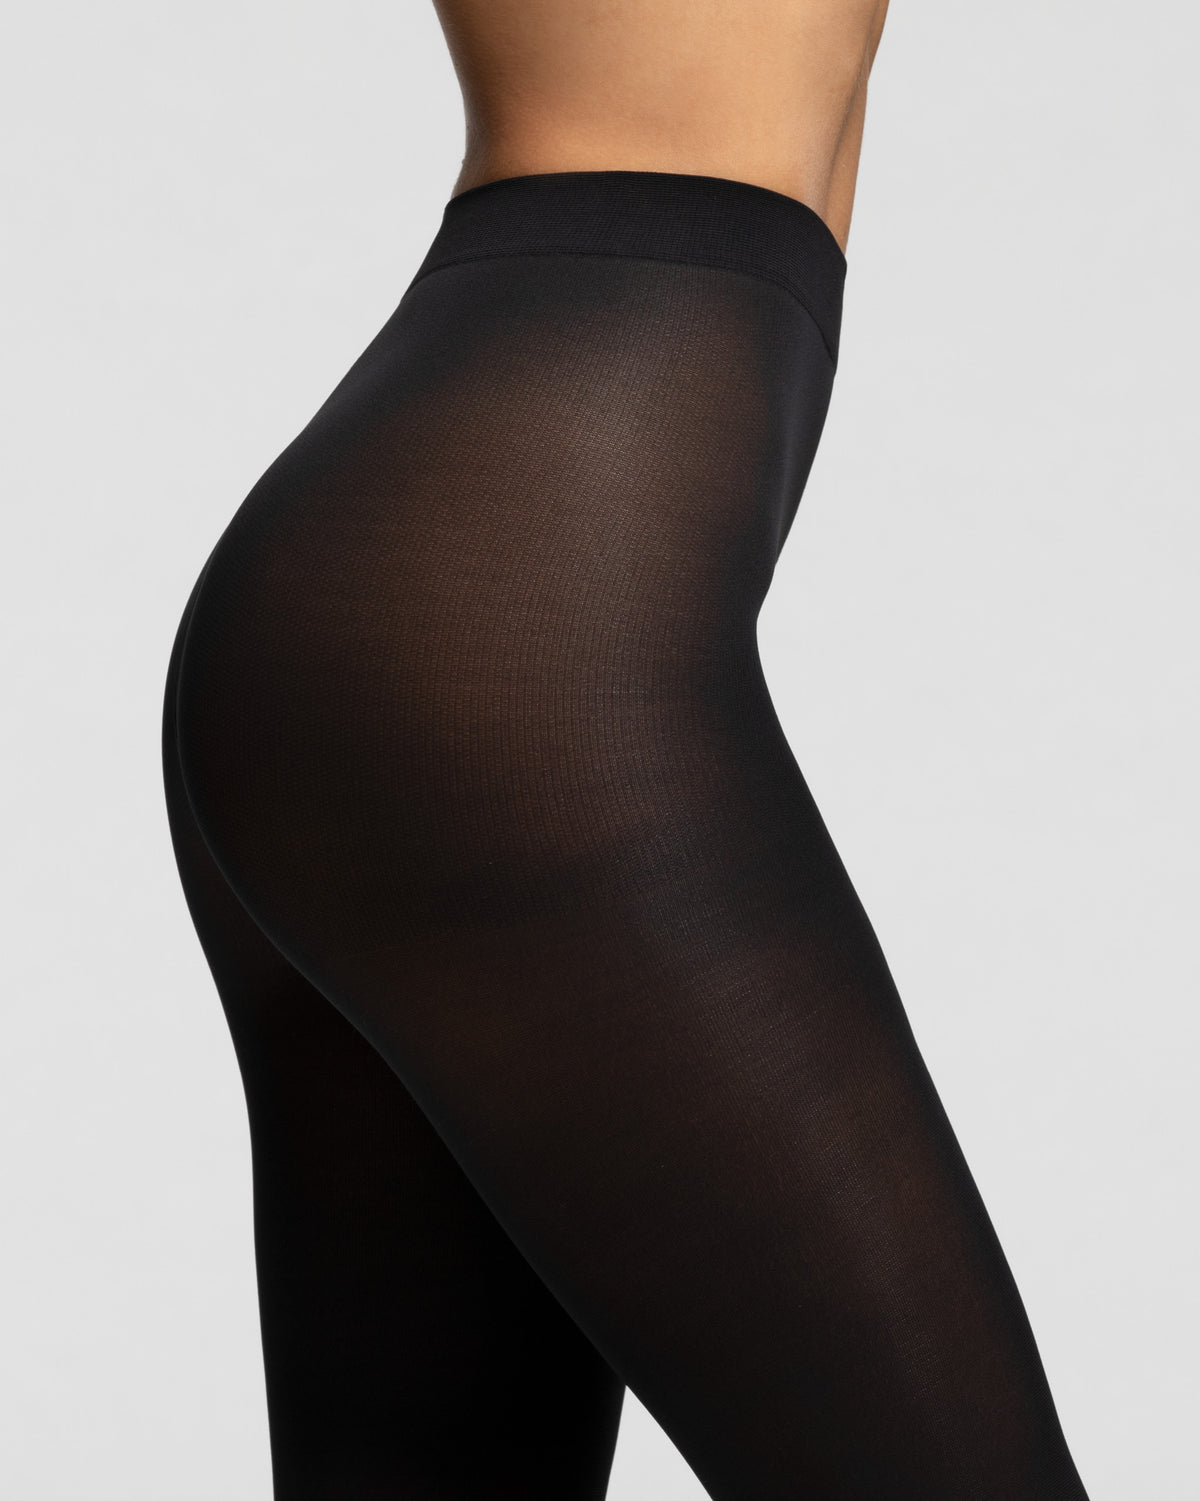 WOMEN'S ULTRA STRETCH DRY TIGHTS